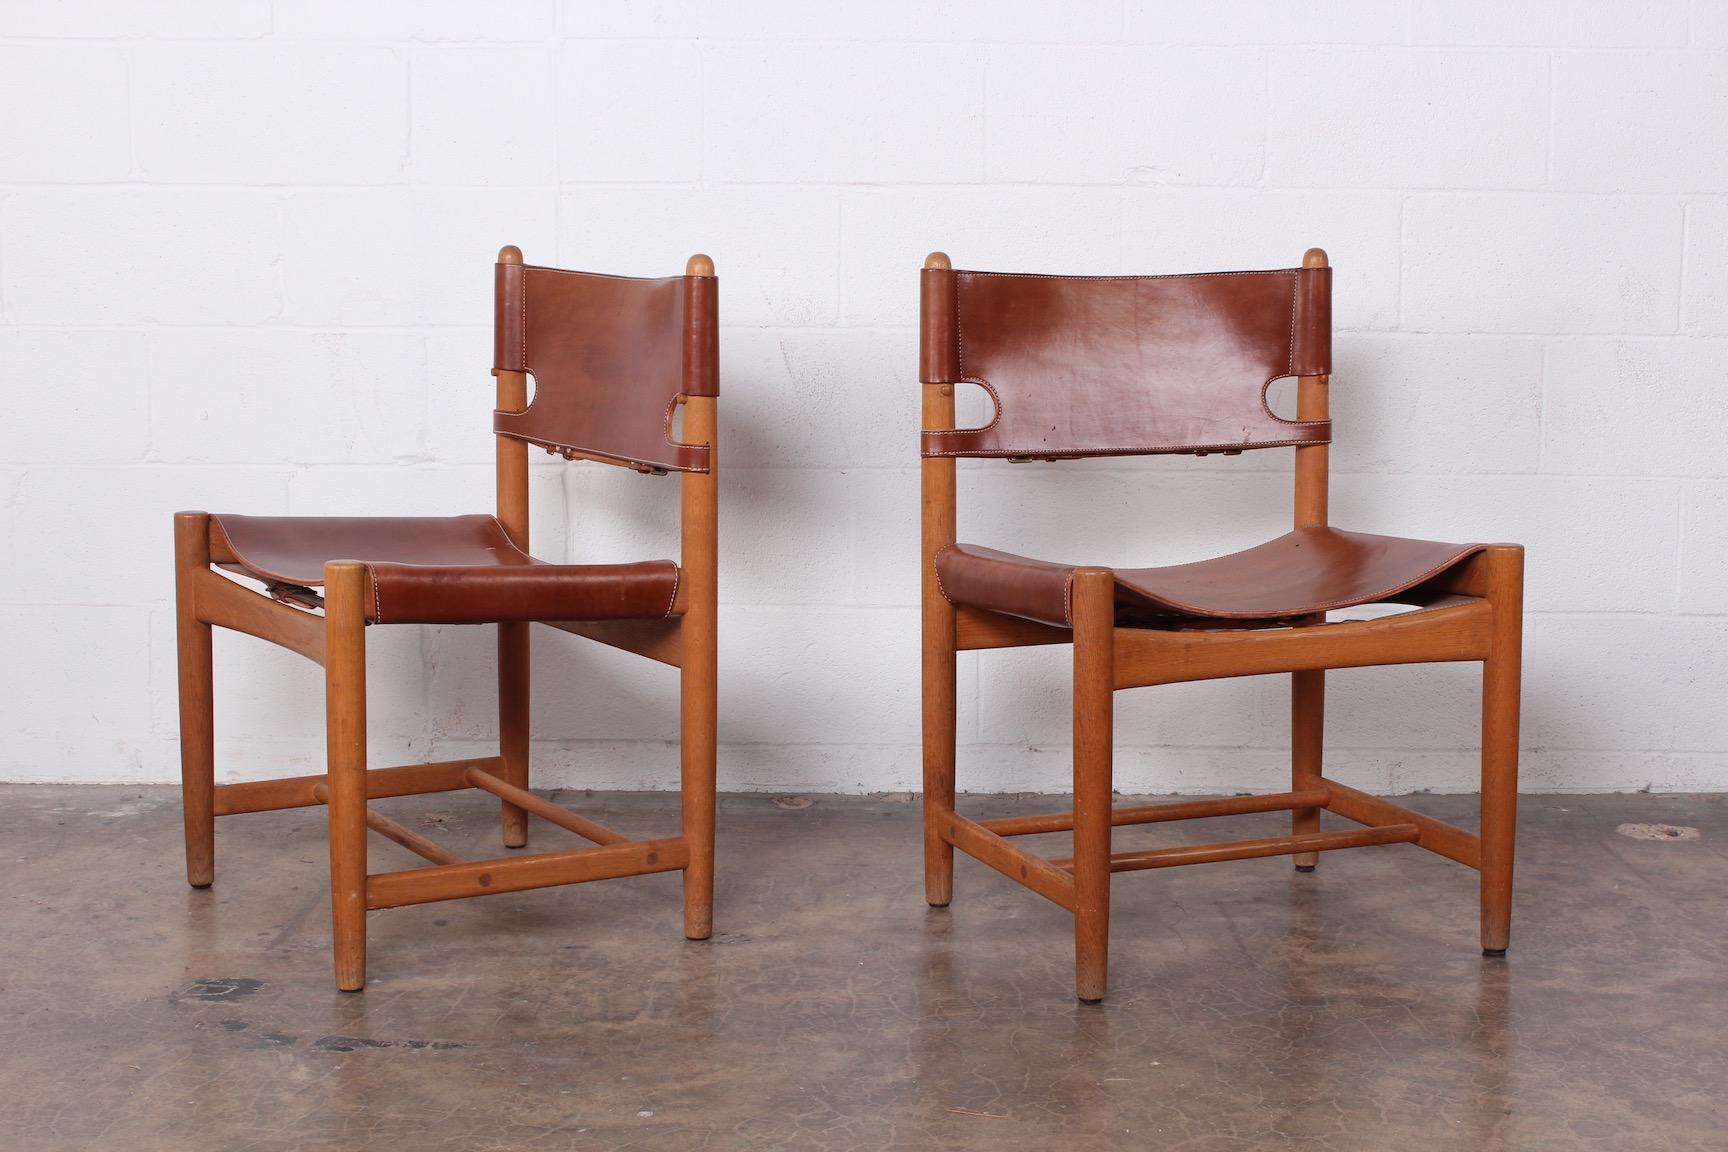 A set of six side chairs and two armchairs in oak and original patinated leather by Børge Mogensen.